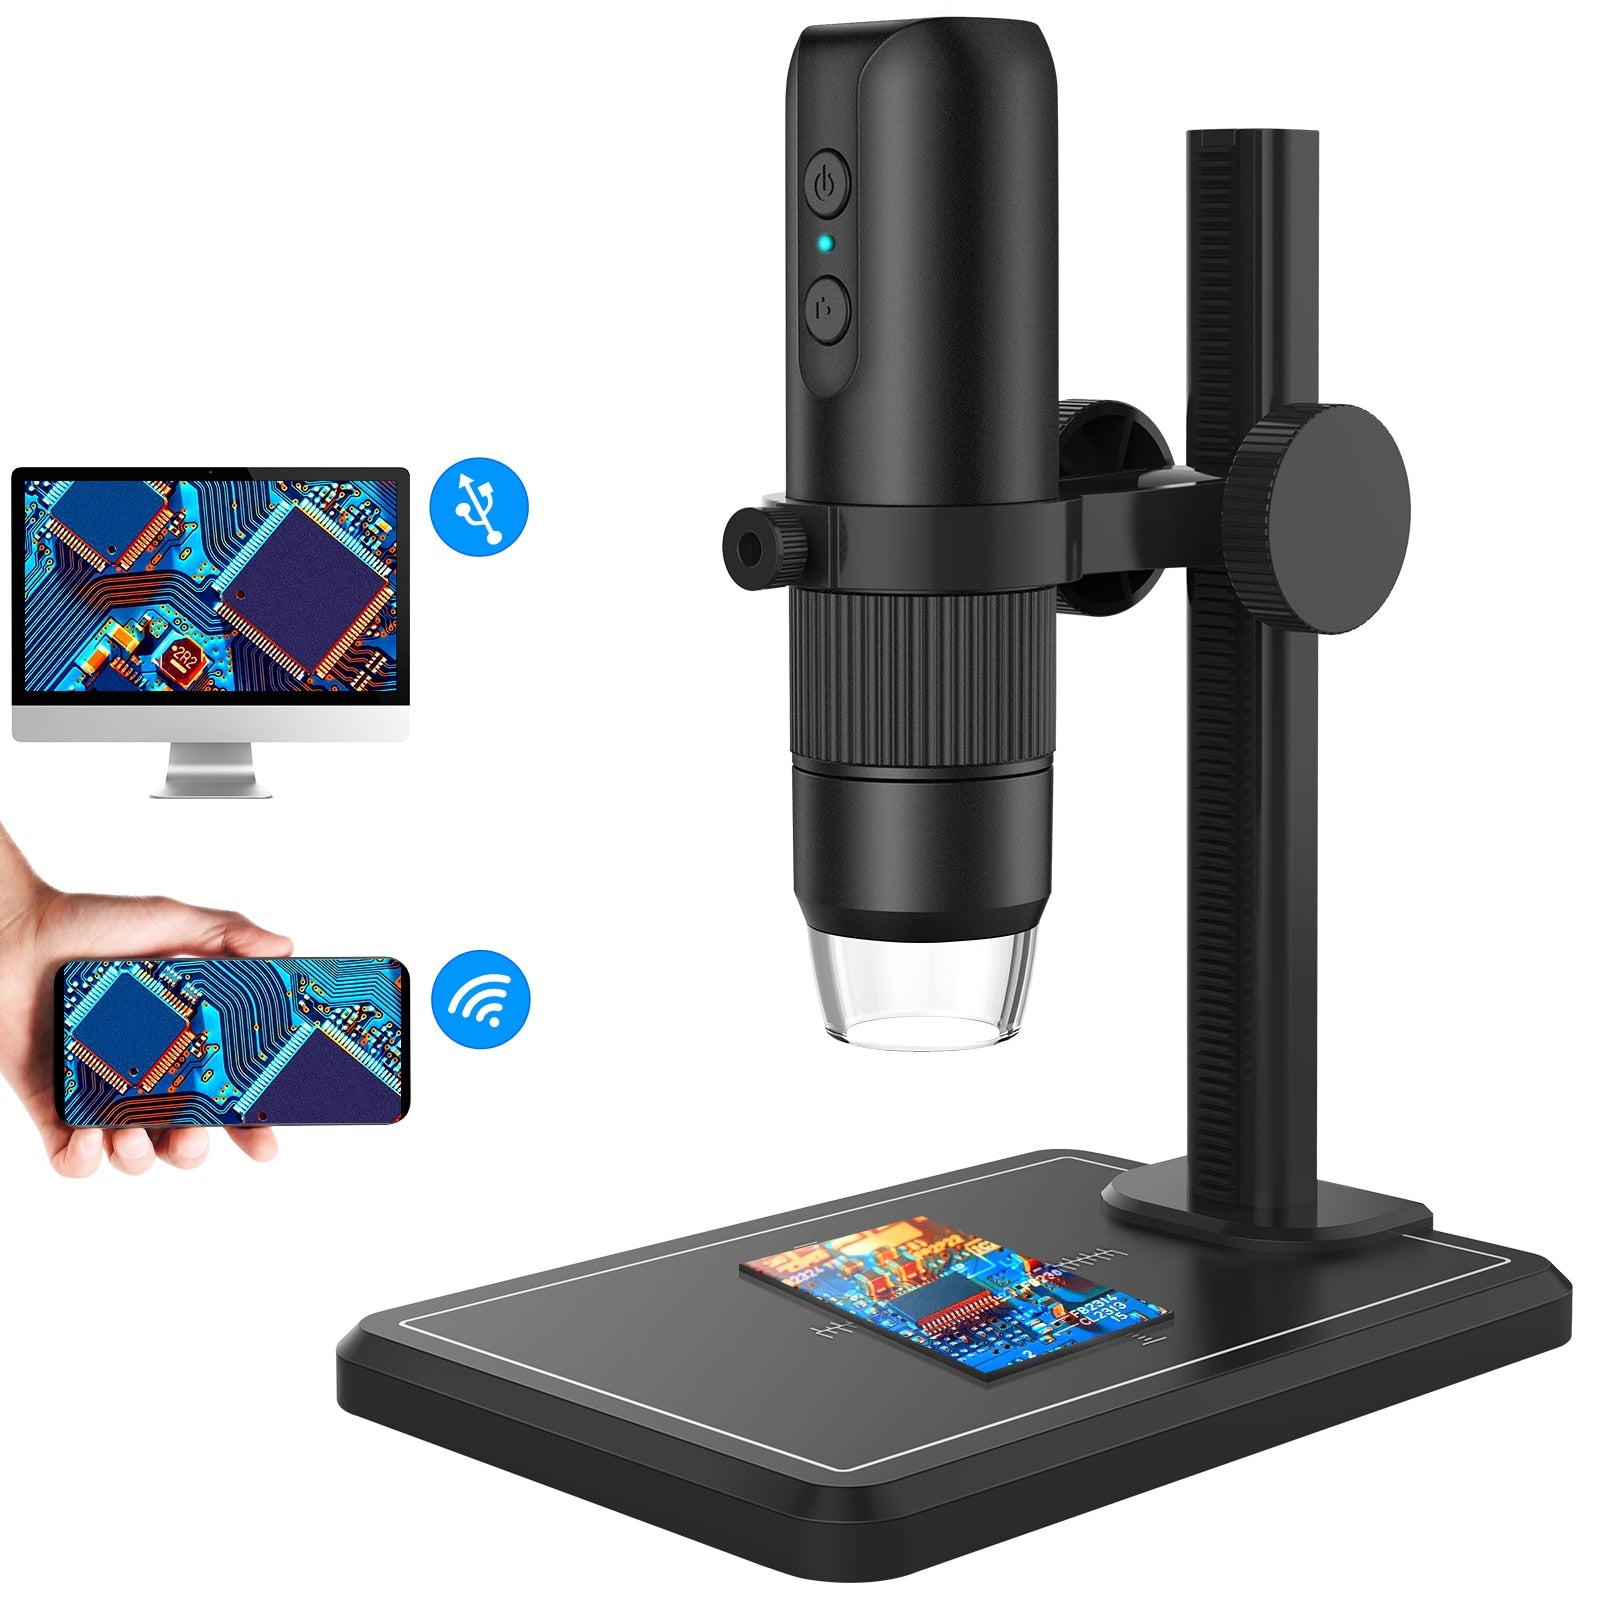 Digital Microscope Professional USB With 8 LEDS Endoscope 1600X Zoom Camera Magnifier For Cell Phone PC Coin Soldering Tools